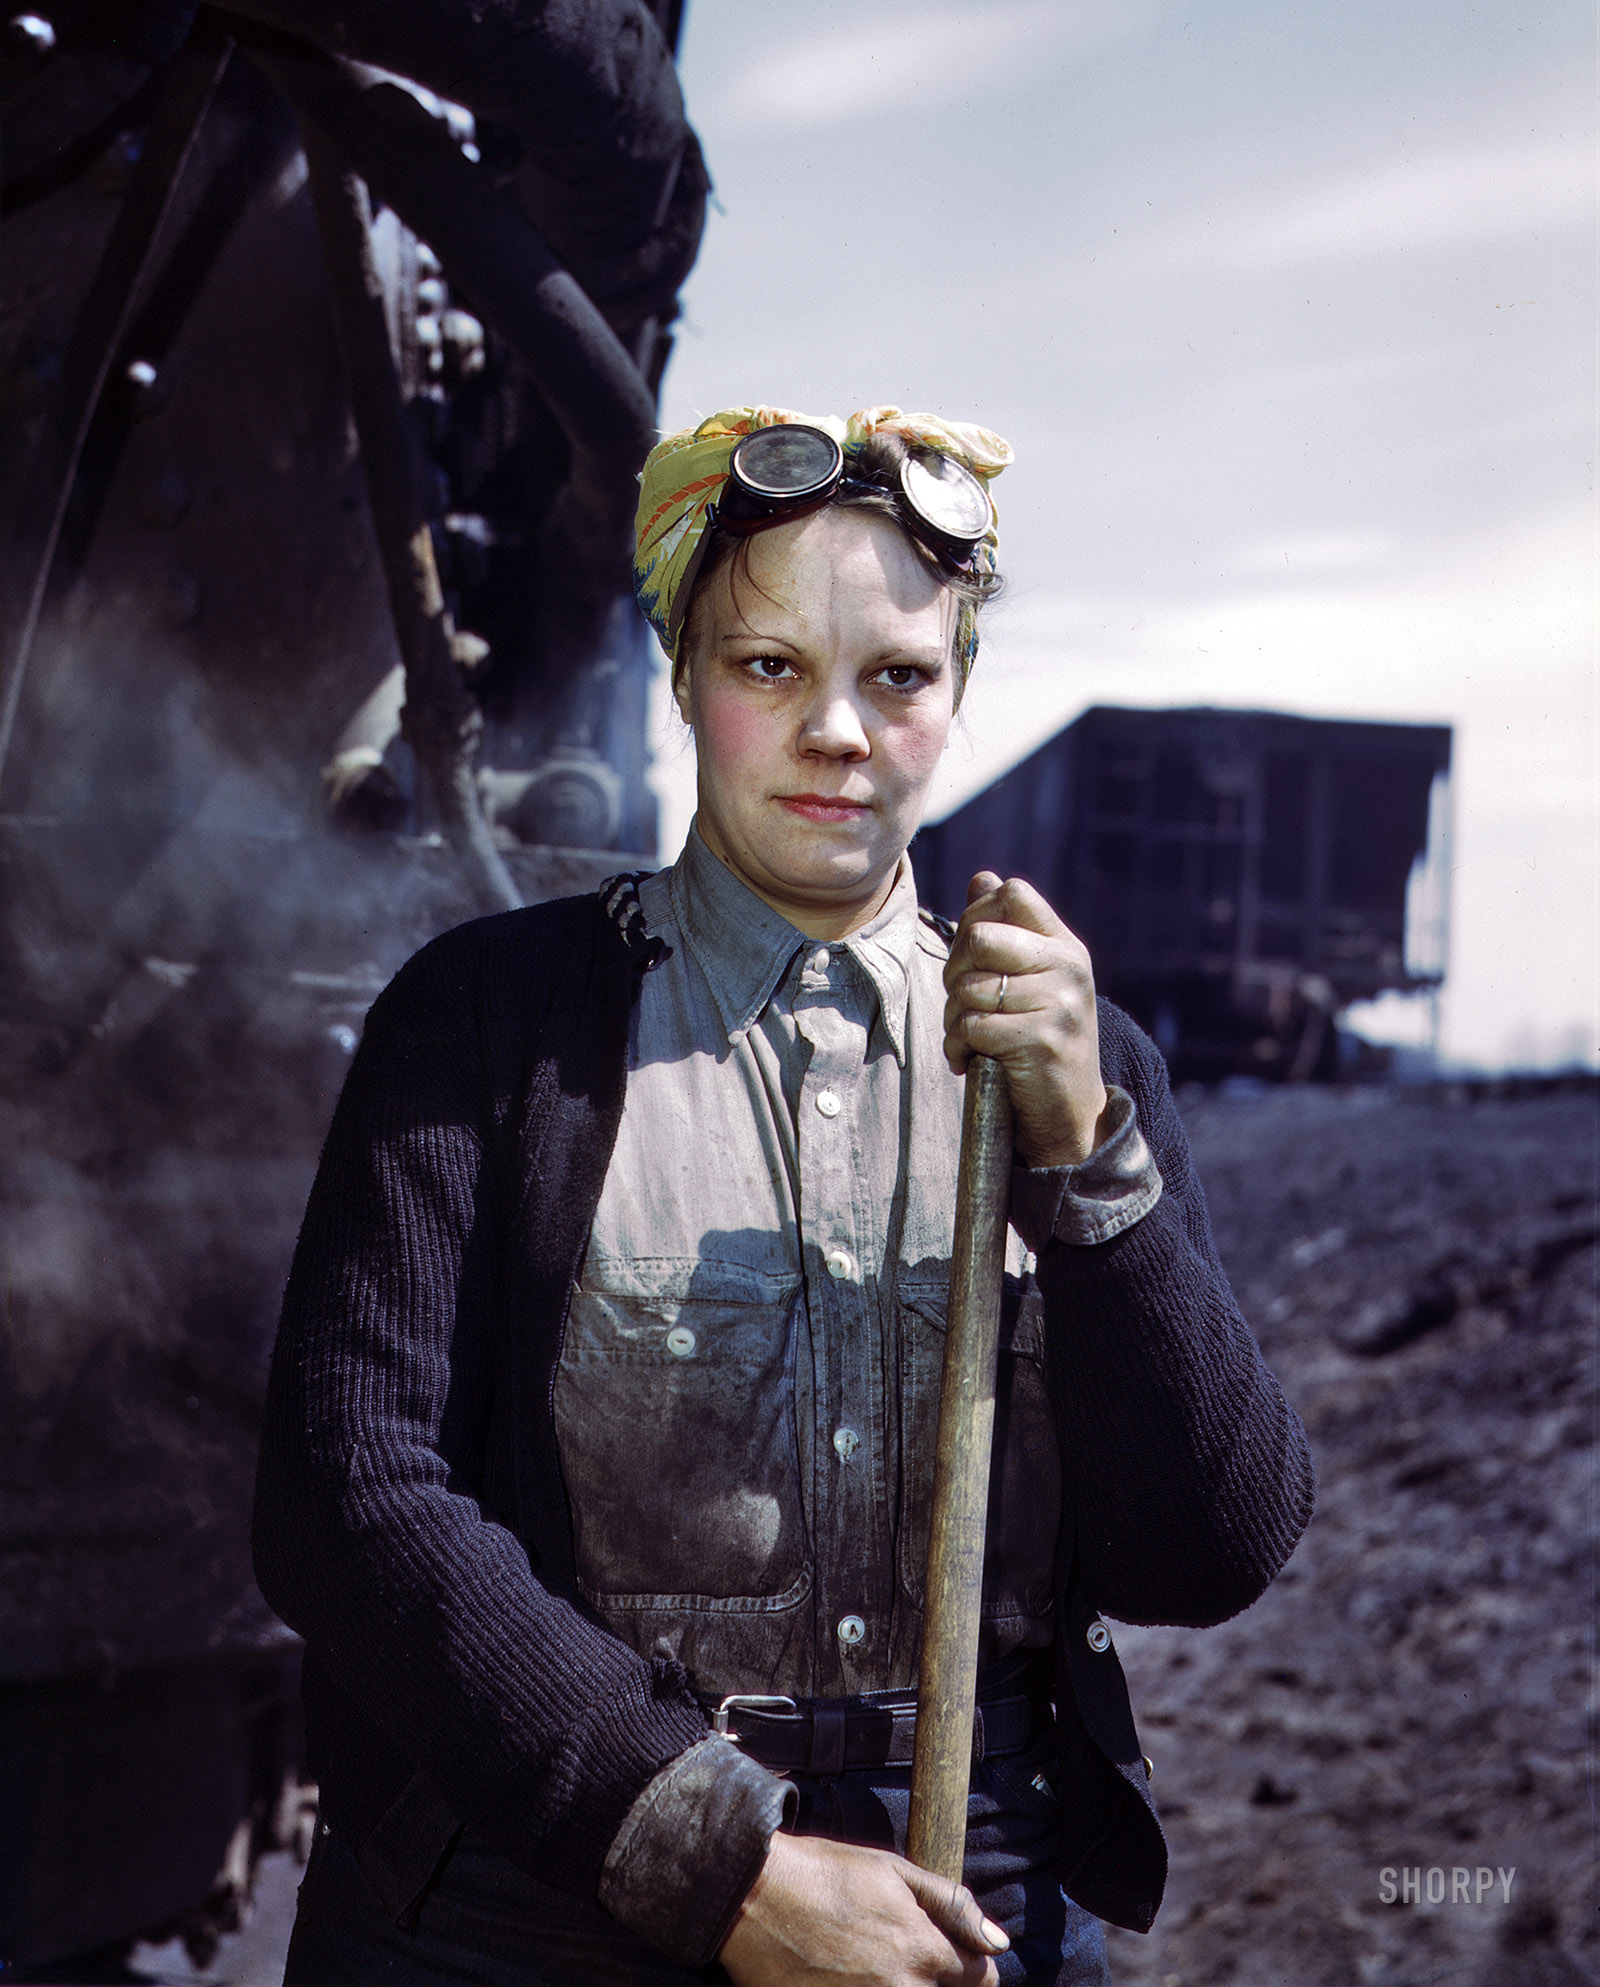 April 1943. Clinton, Iowa. "Mrs. Irene Bracker, mother of two, employed at the roundhouse as a wiper, Chicago & North Western R.R." 4x5 Kodachrome transparency by Jack Delano for the Office of War Information. View full size.